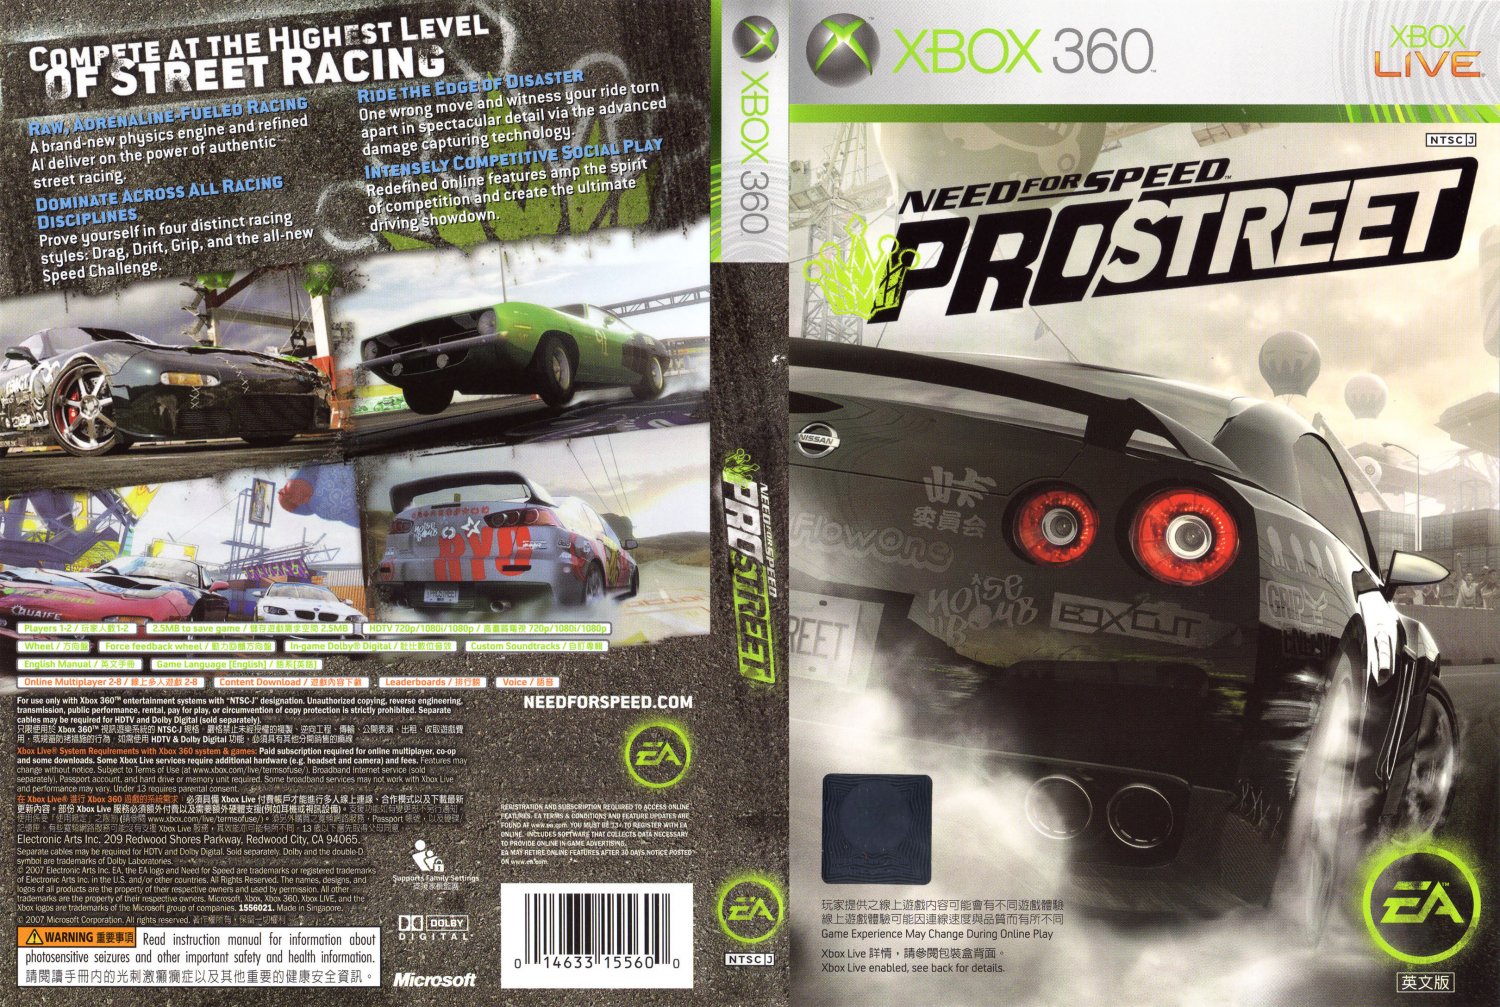 Need for speed  Pro street Xbox360  XBOX 360 Game Covers  NFSPRO 